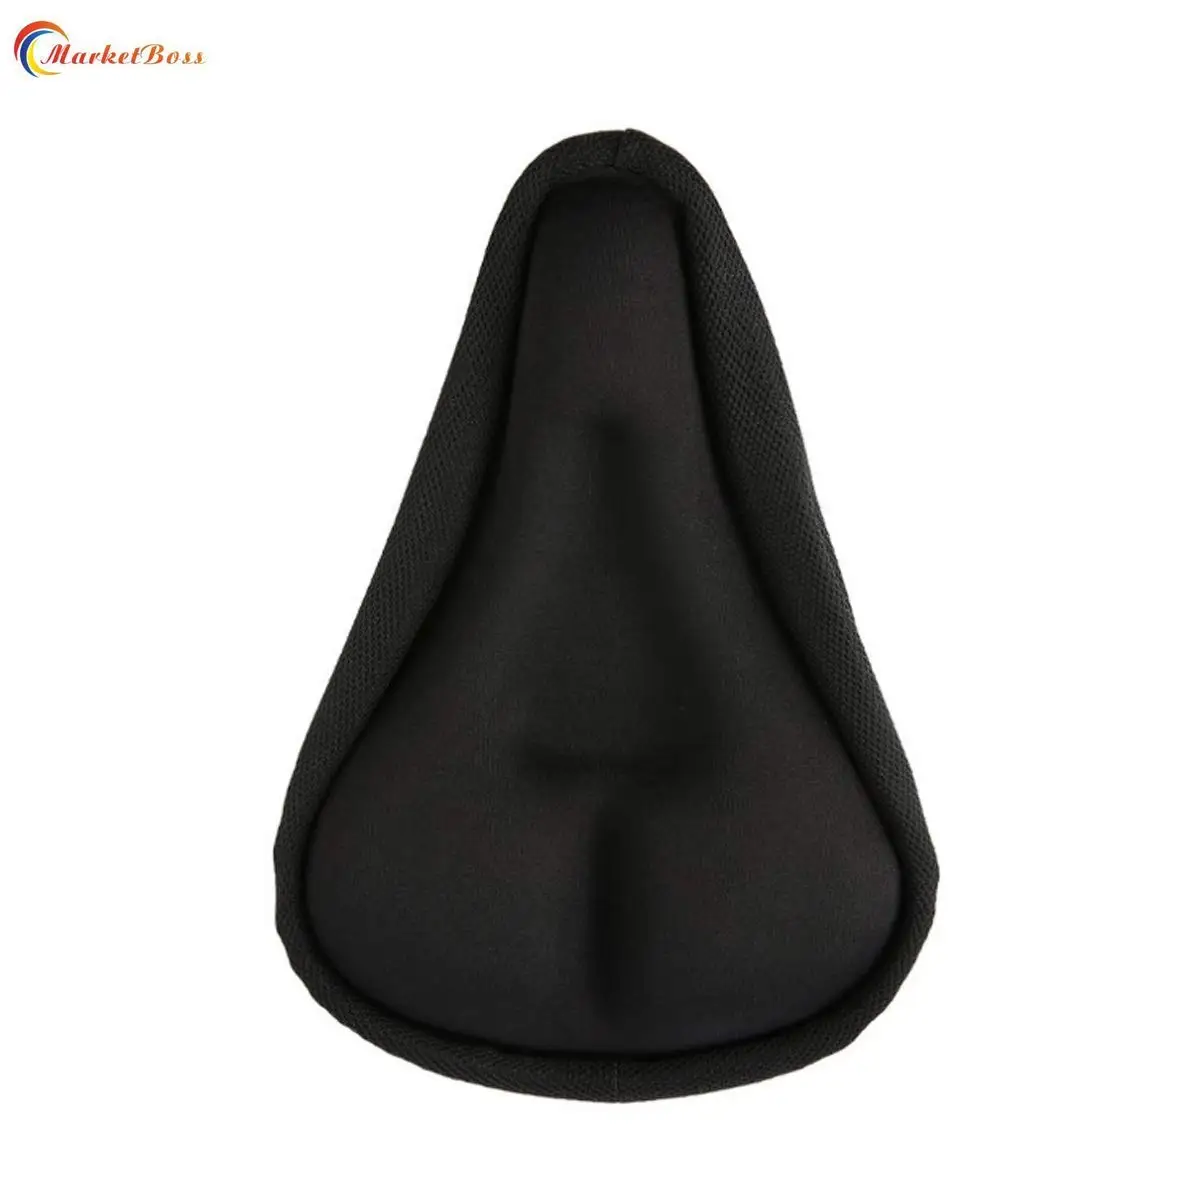 vibrating bicycle seat cover